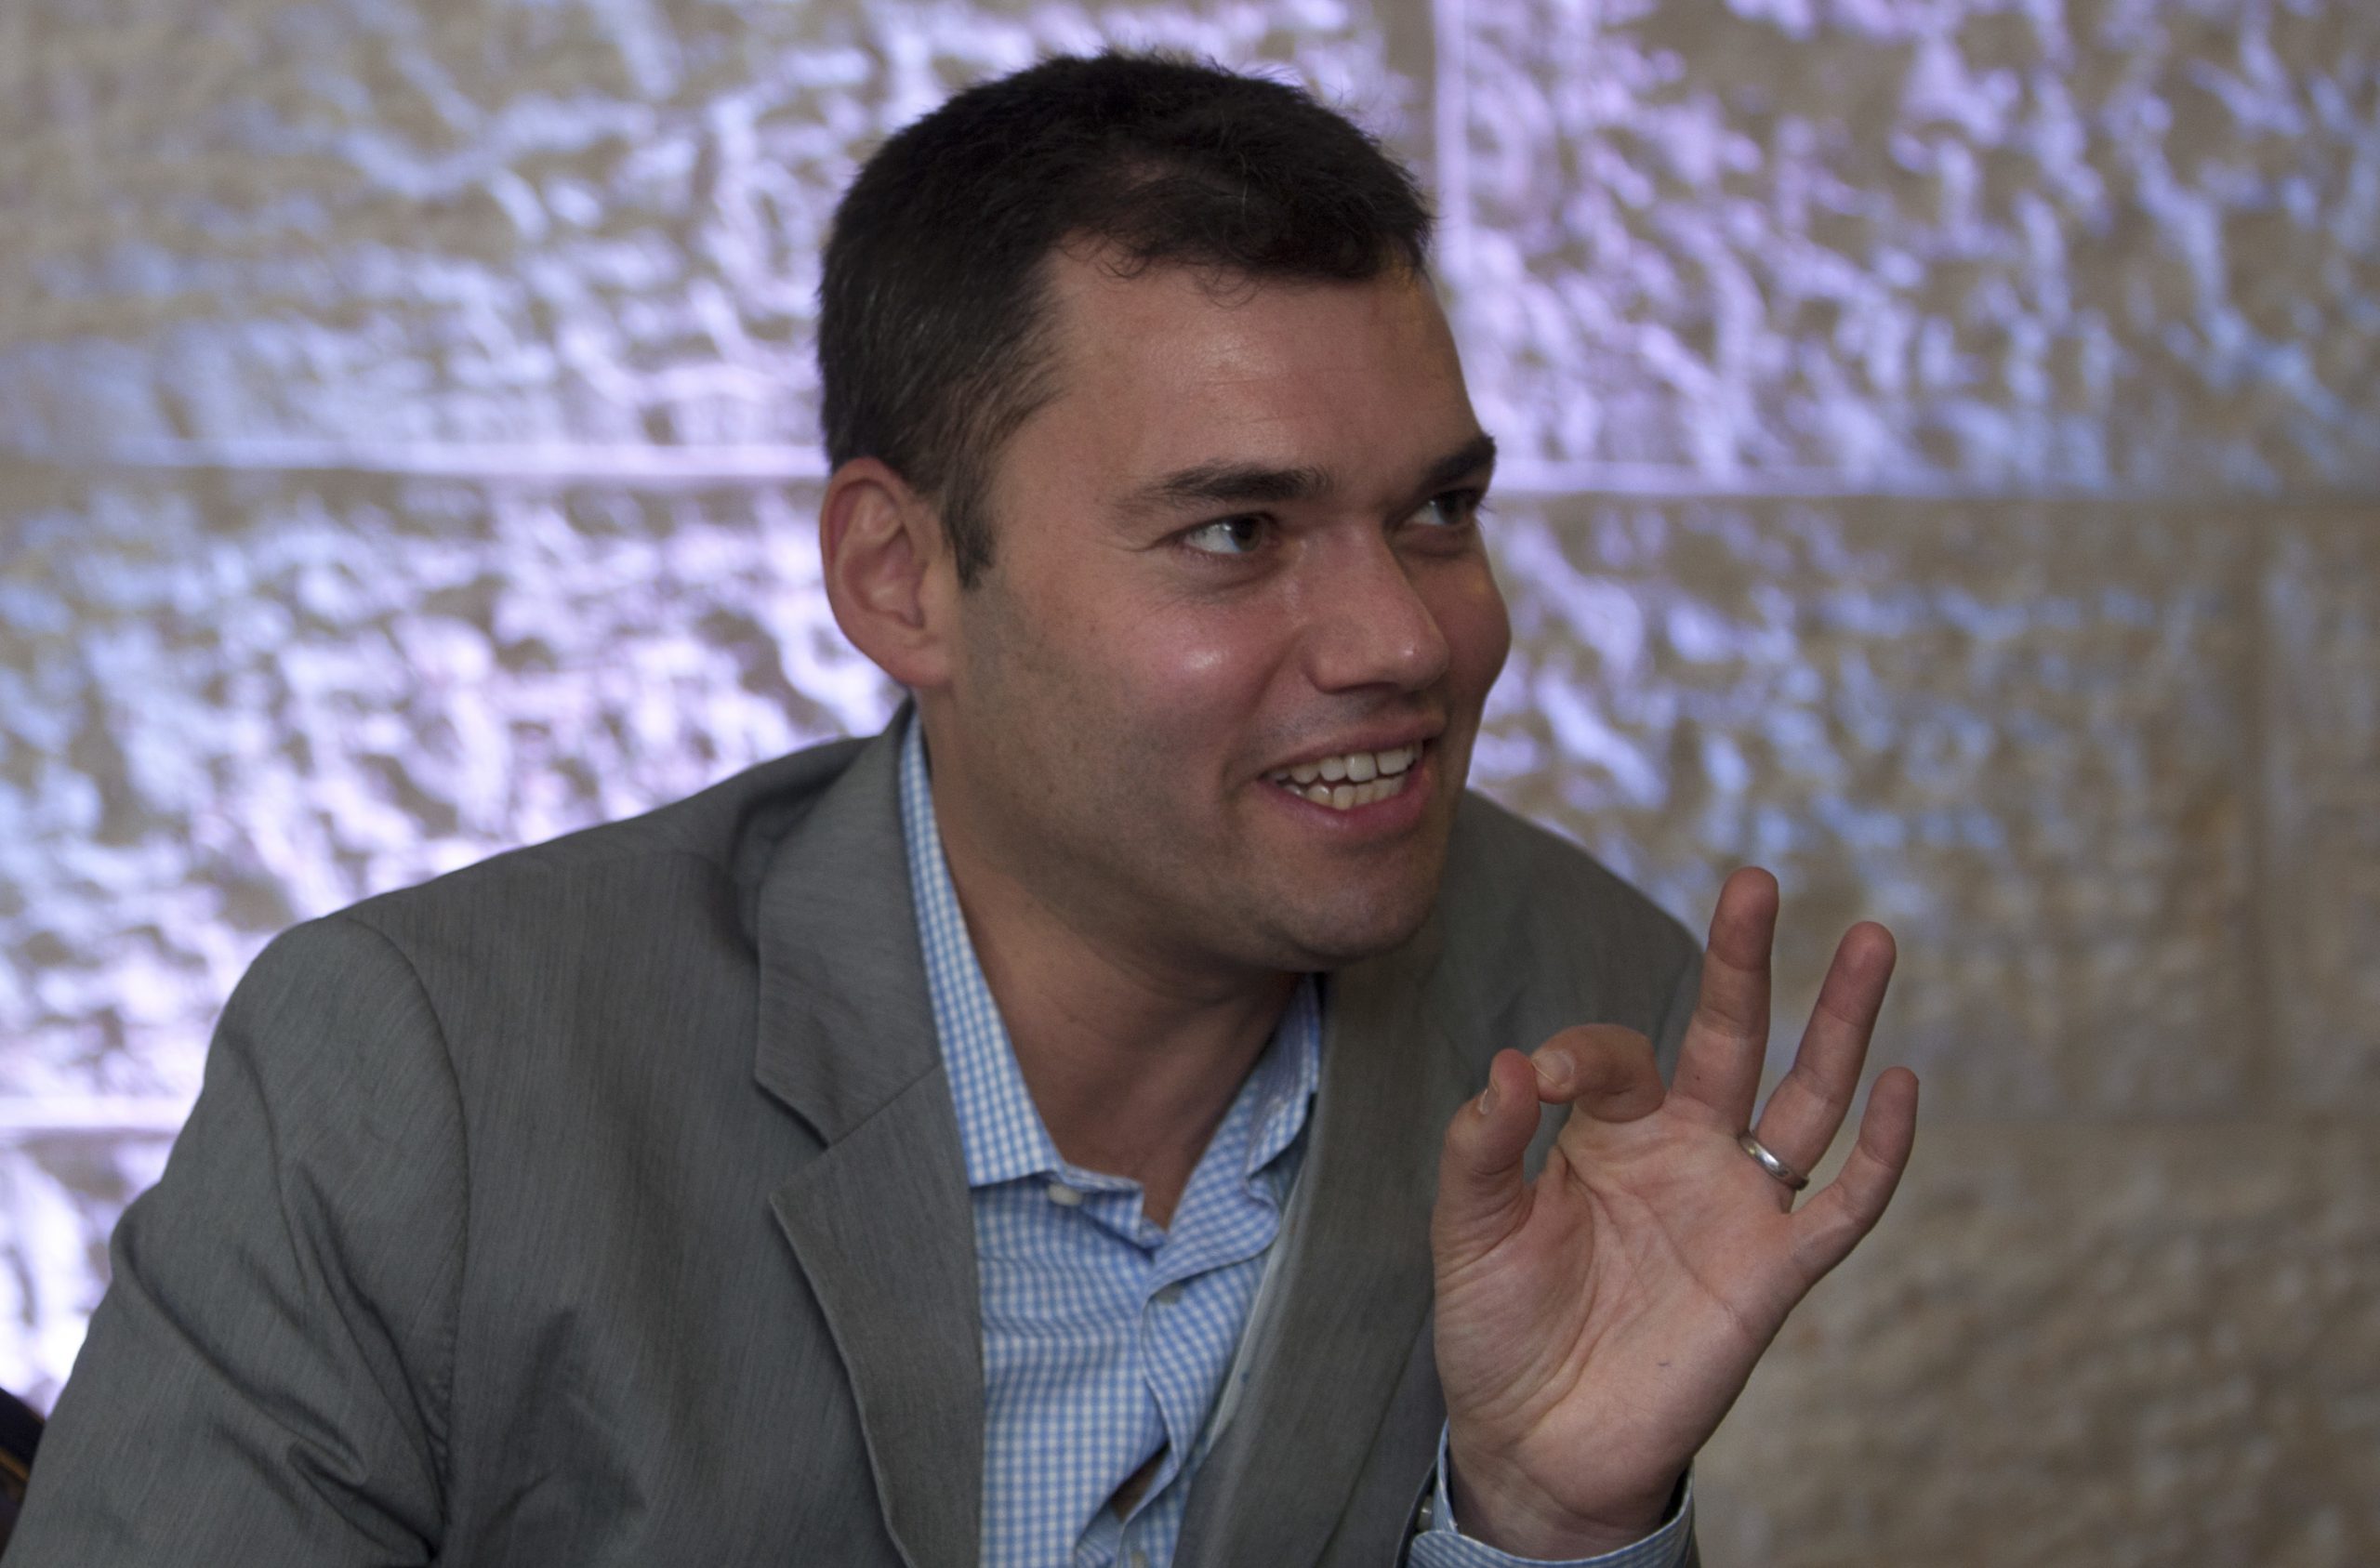 Commentator Peter Beinart serves as a “court Jew” at the New York Times, where he has called for dissolution of Israel as a Jewish state and for denying Israel’s right to defend itself with nuclear weapons if Iran is prevented from developing them.